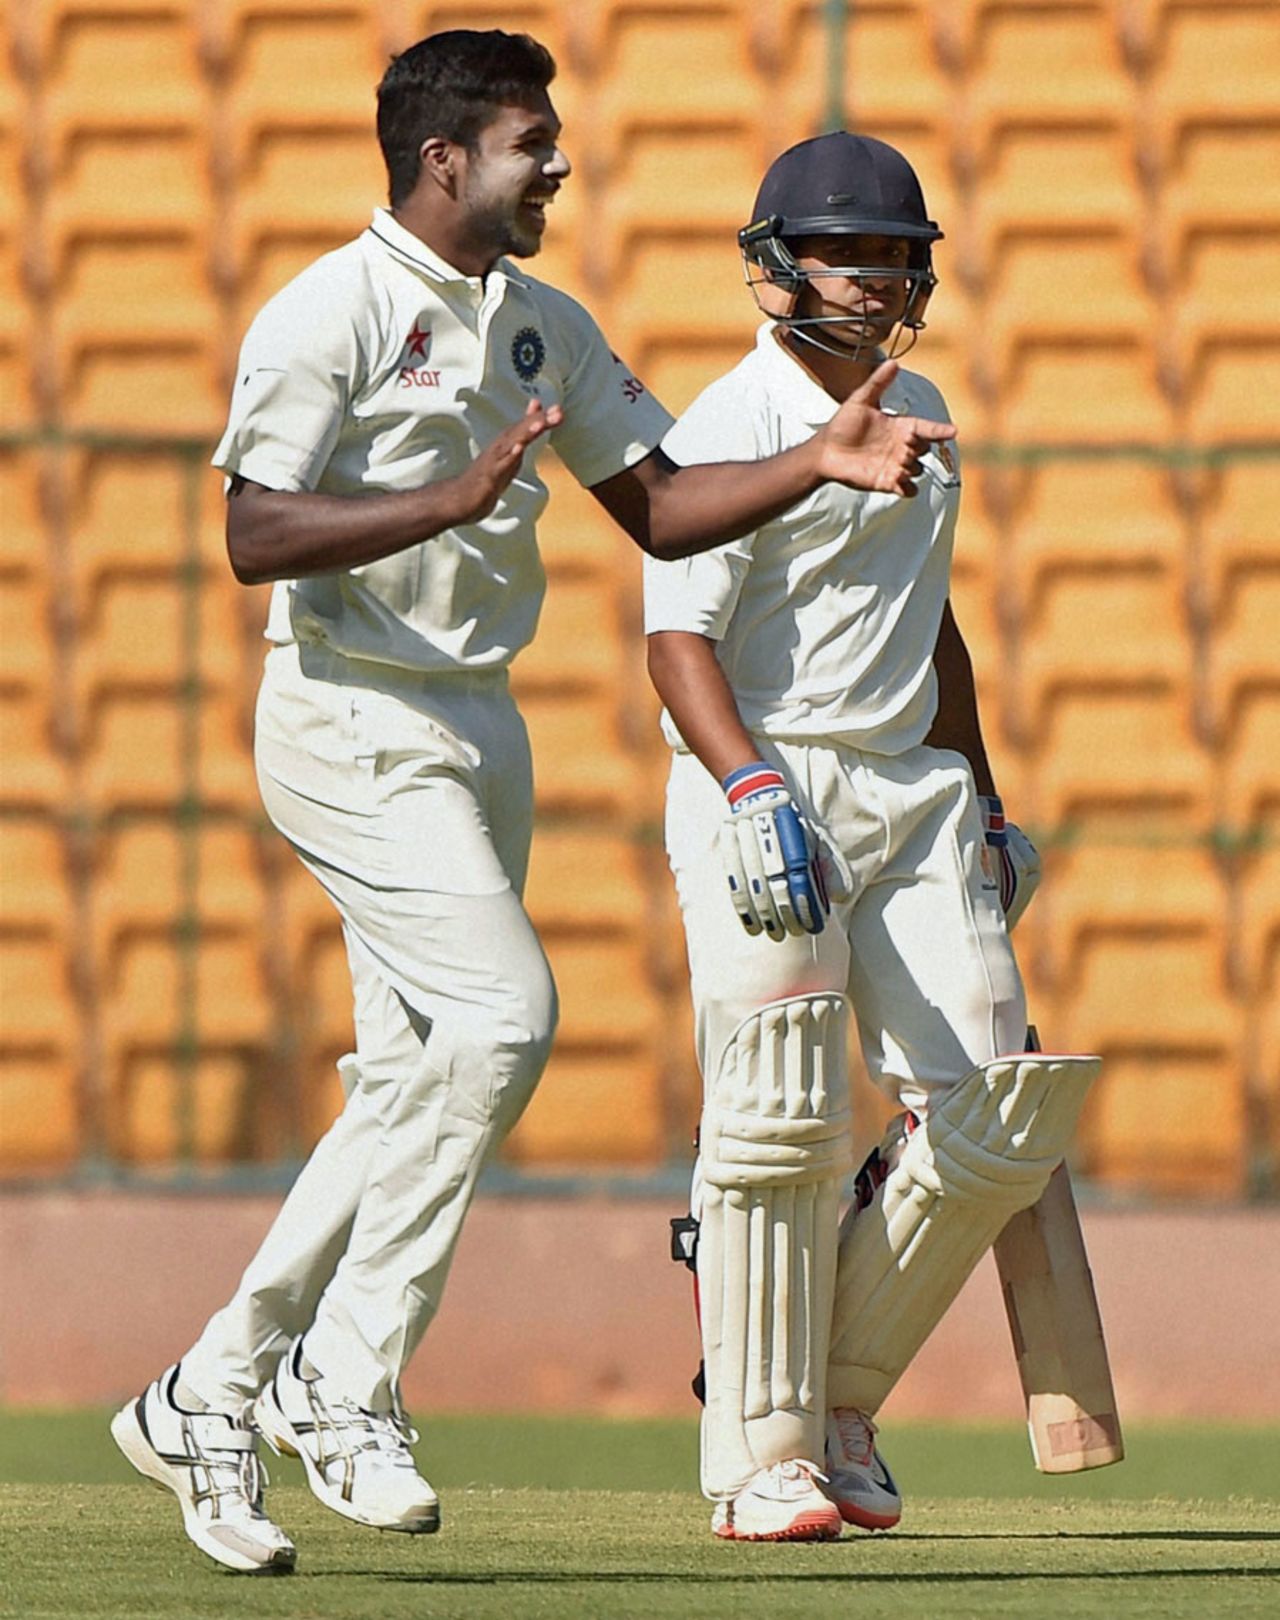 Varun Aaron celebrates after getting the wicket of Karun Nair, Karnataka v Rest of India, Irani Cup 2014-15, 1st day, Bangalore, March 17, 2015